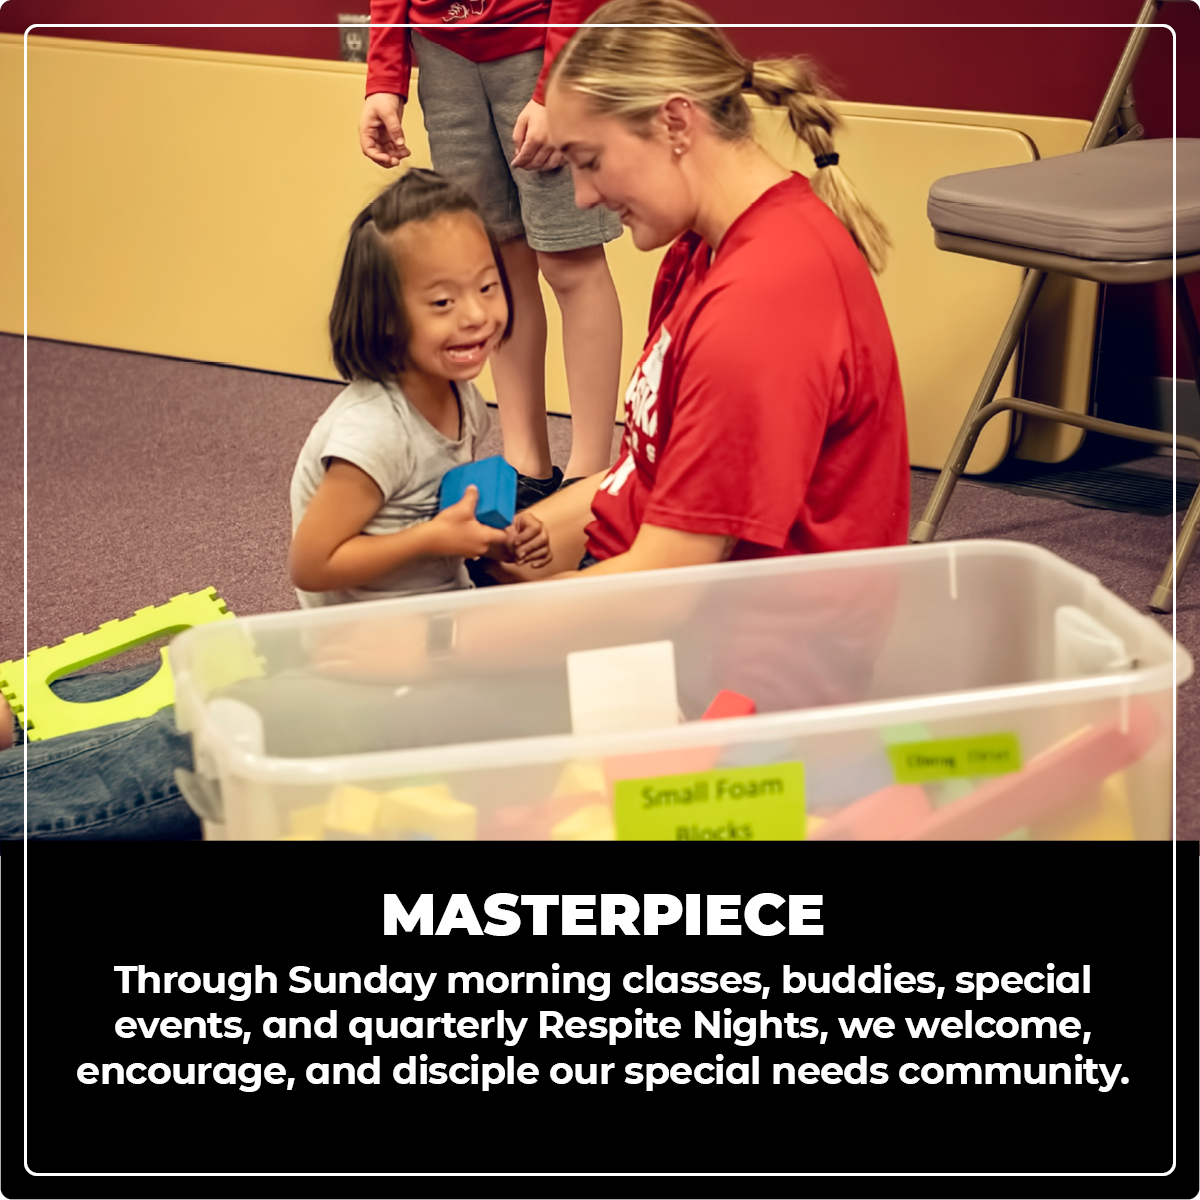 Masterpiece: Through Sunday morning classes, buddies, special events, and quarterly Respite Nights, we welcome, encourage, and disciple our special needs community.